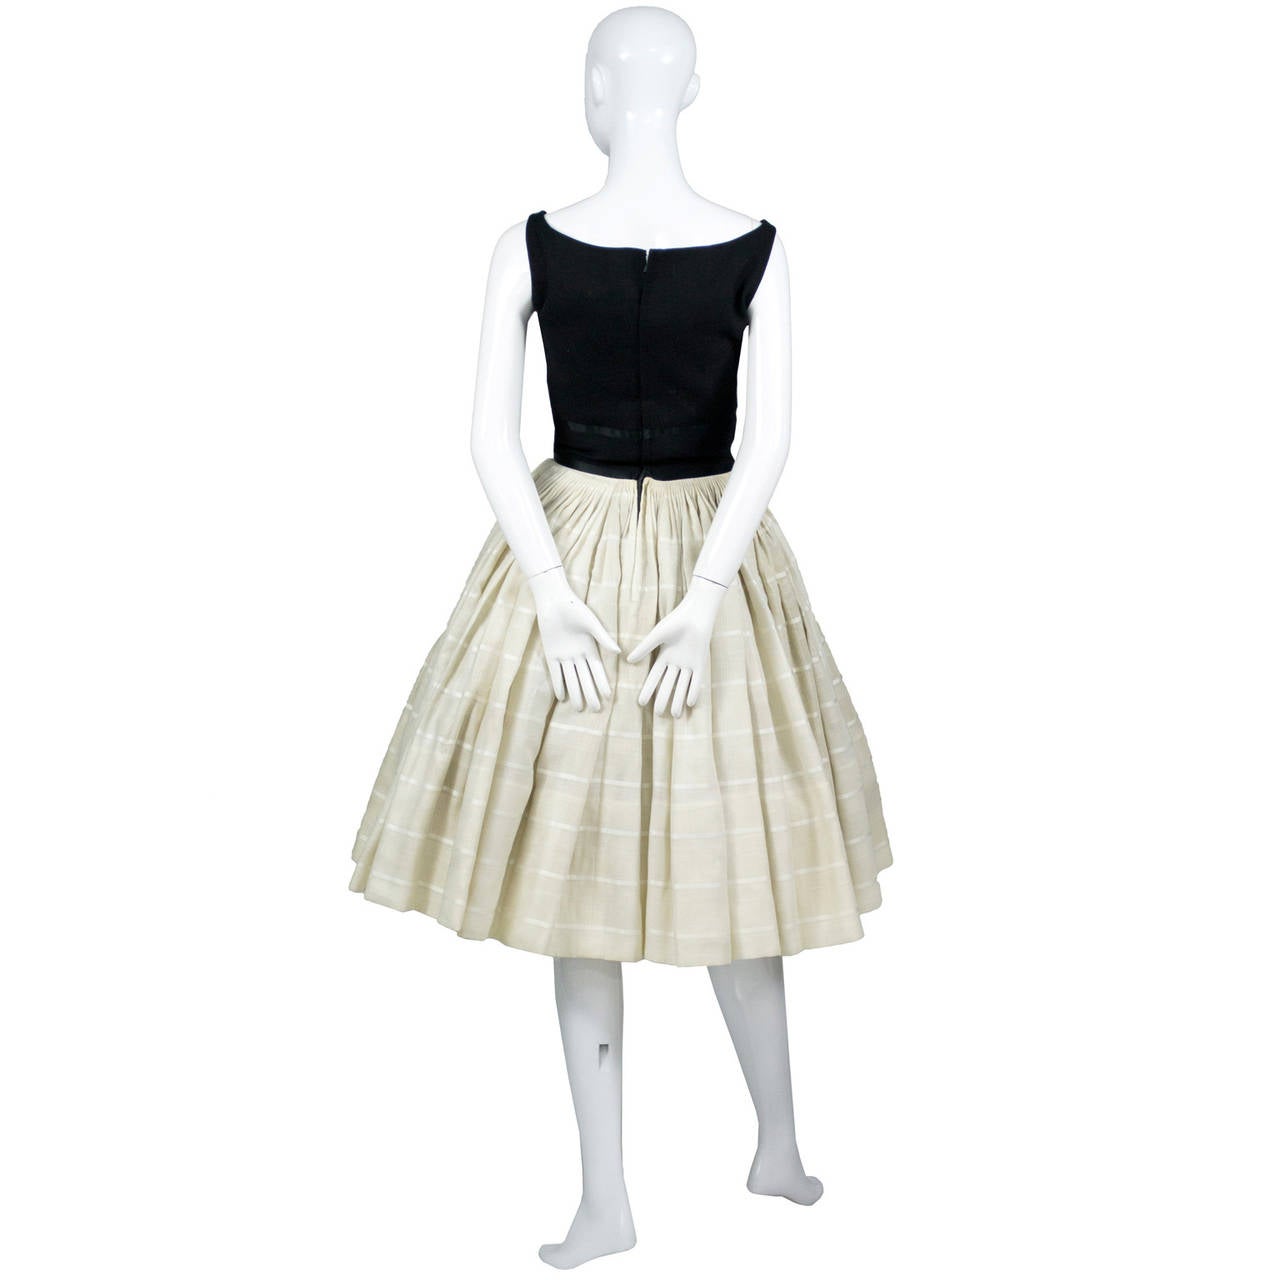 This is a fabulous 1960's James Galanos designer vintage dress with black bodice and natural and white full skirt. This dress was purchased at Woolf Brothers and in excellent condition with no flaws found. The dress appears to have only been worn